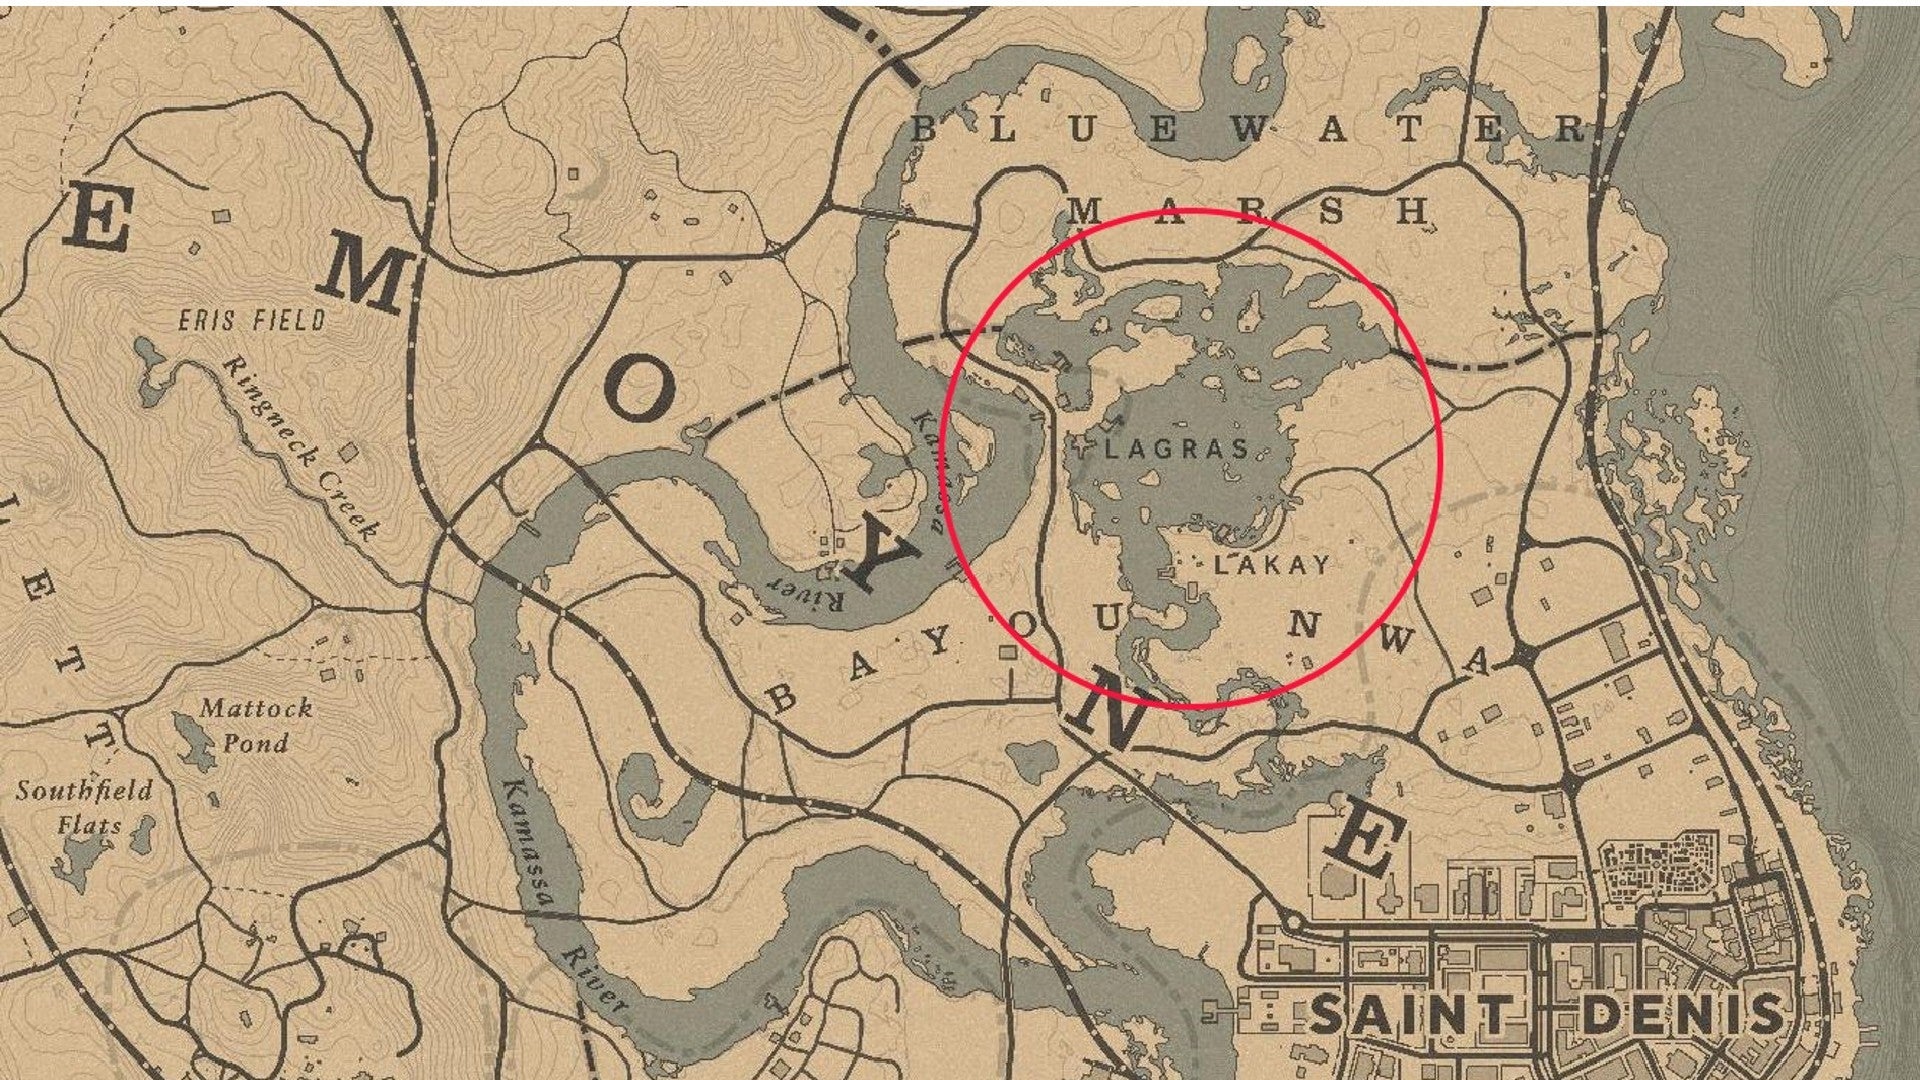 Red Dead Redemption 2 screenshot showing part of the map with a red ring around the swamp in Lagras.